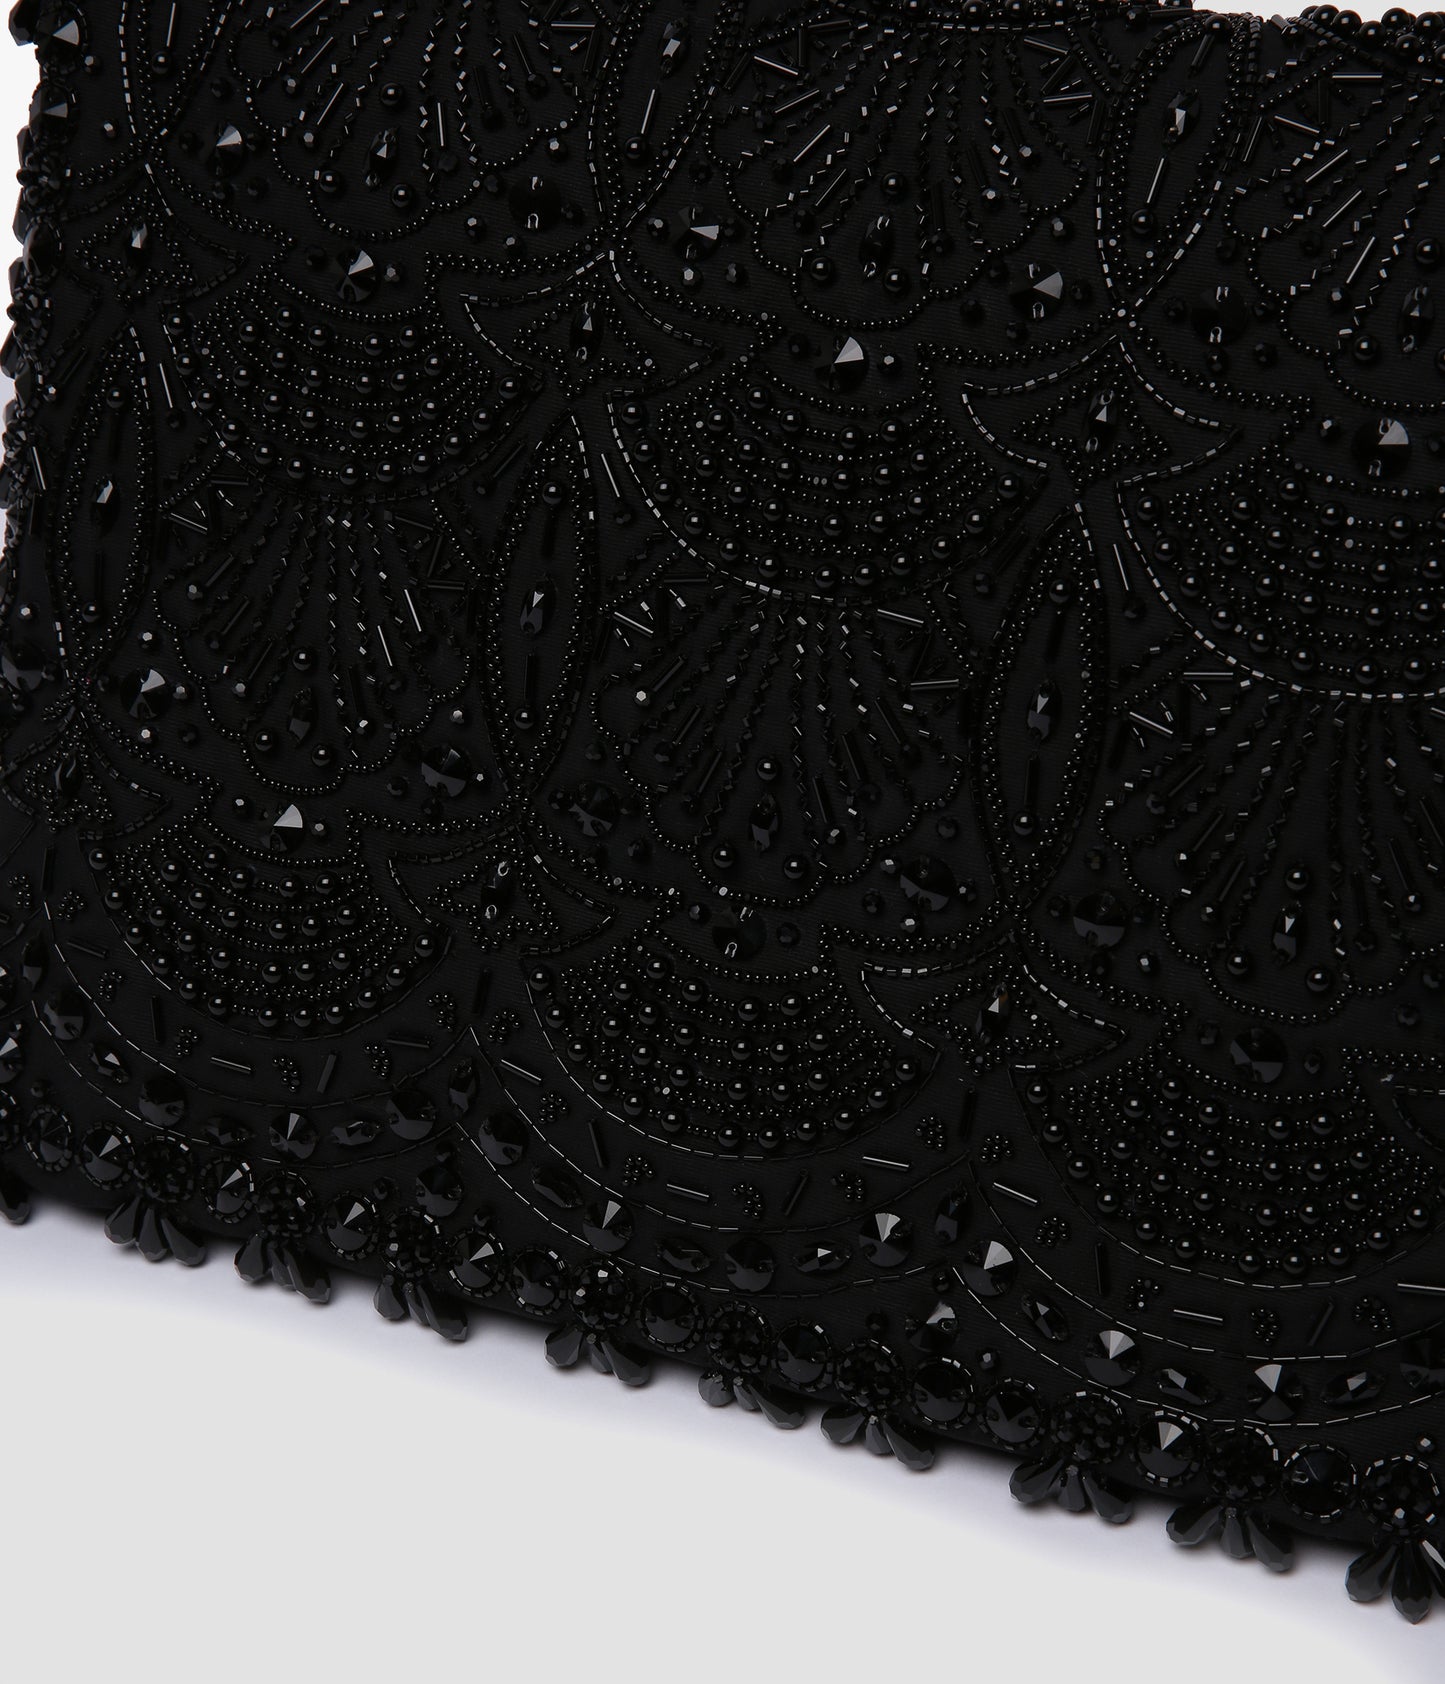 Black Embroidered Faille Bag